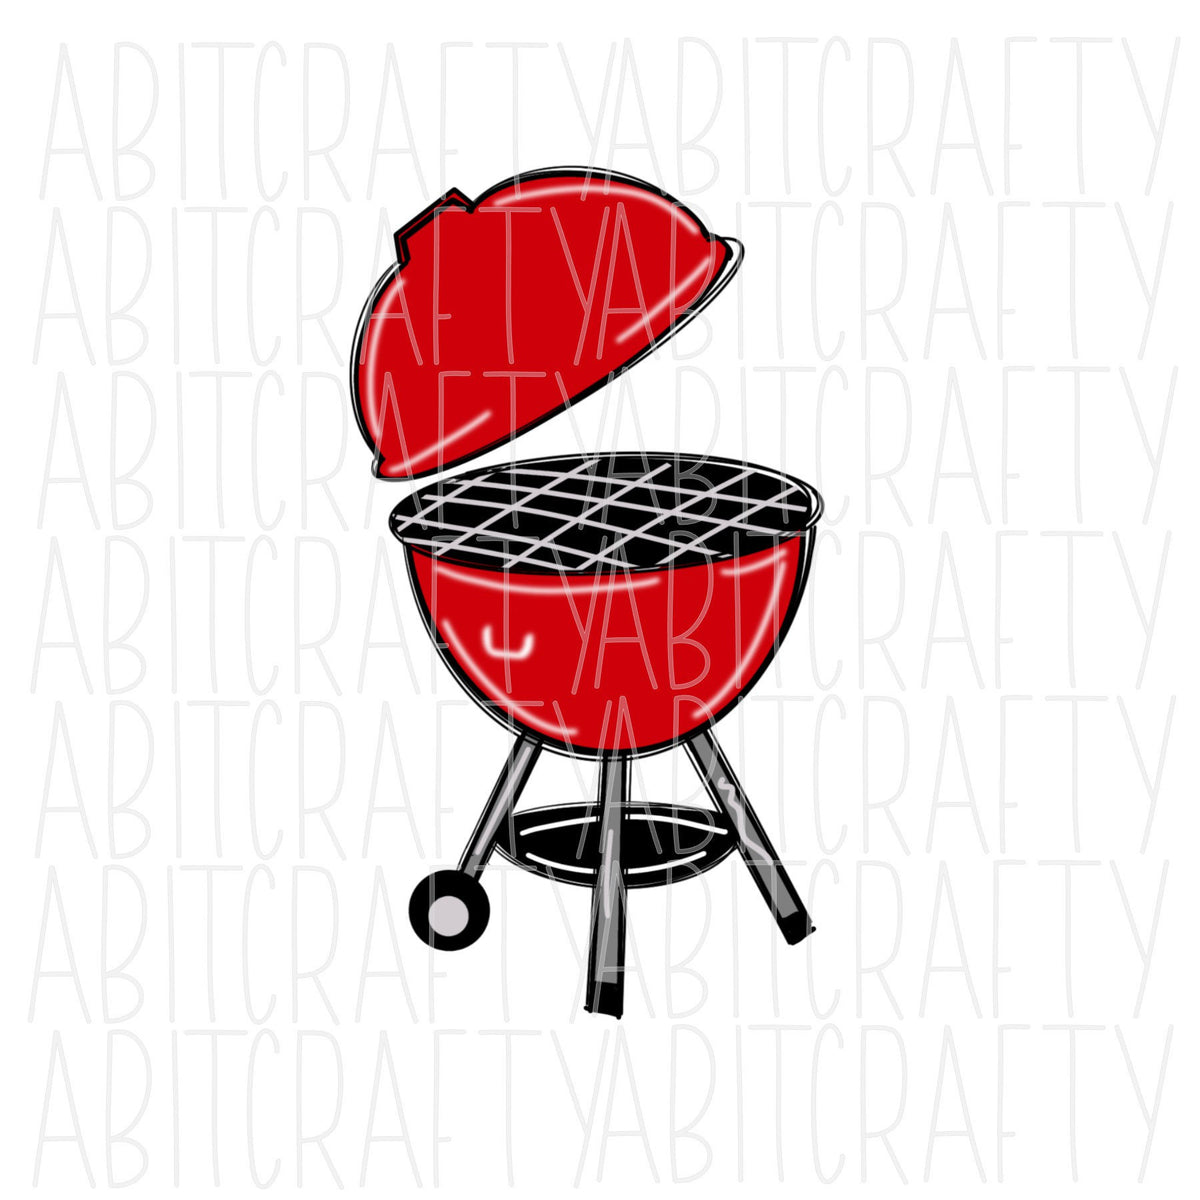 Outdoor Grilling Clipart Transparent Background, Outdoor Barbecue